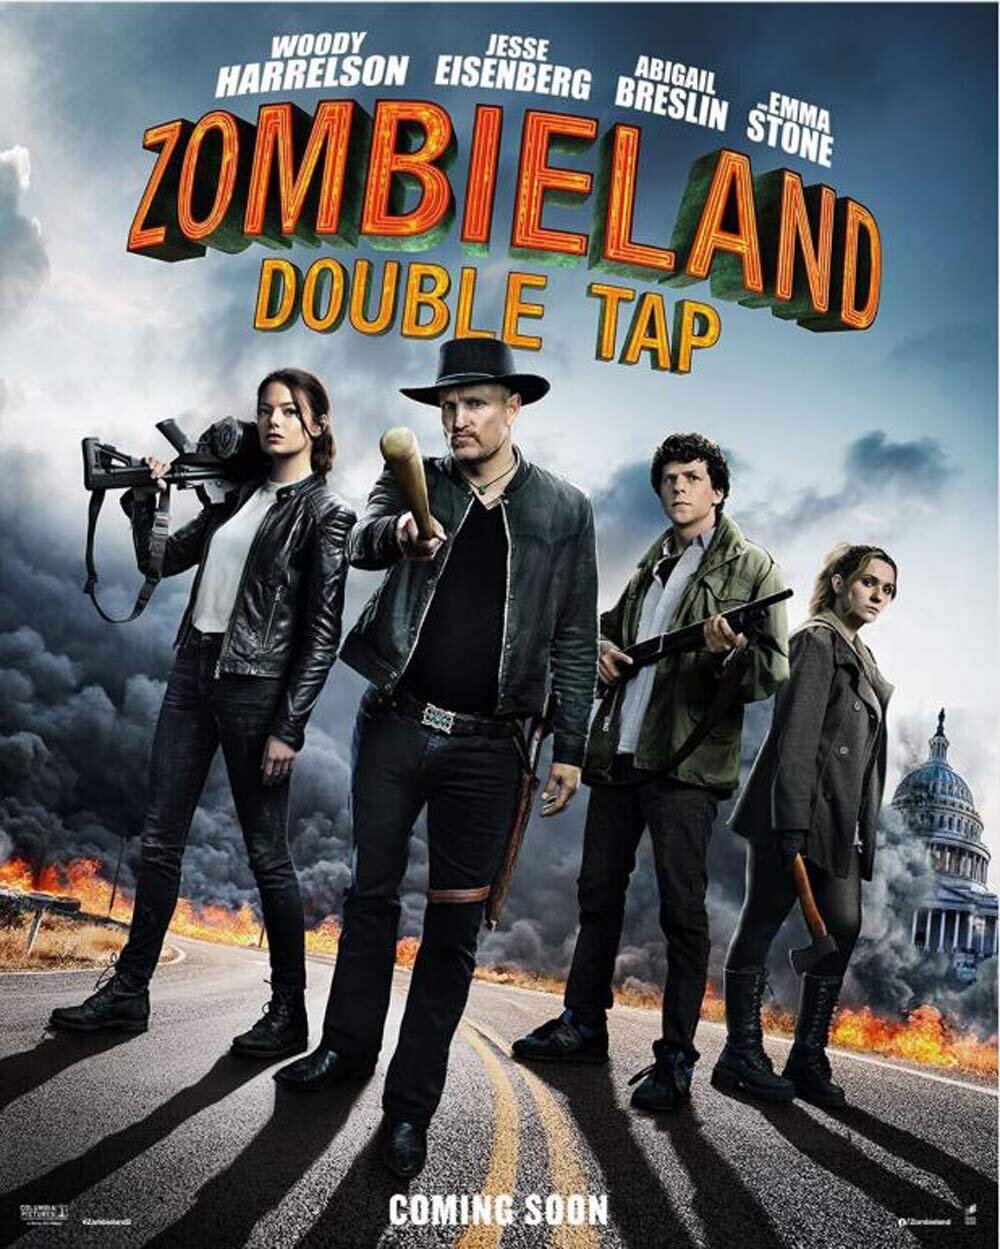 How 'Zombieland Double Tap' Ruined Something We Once Enjoyed